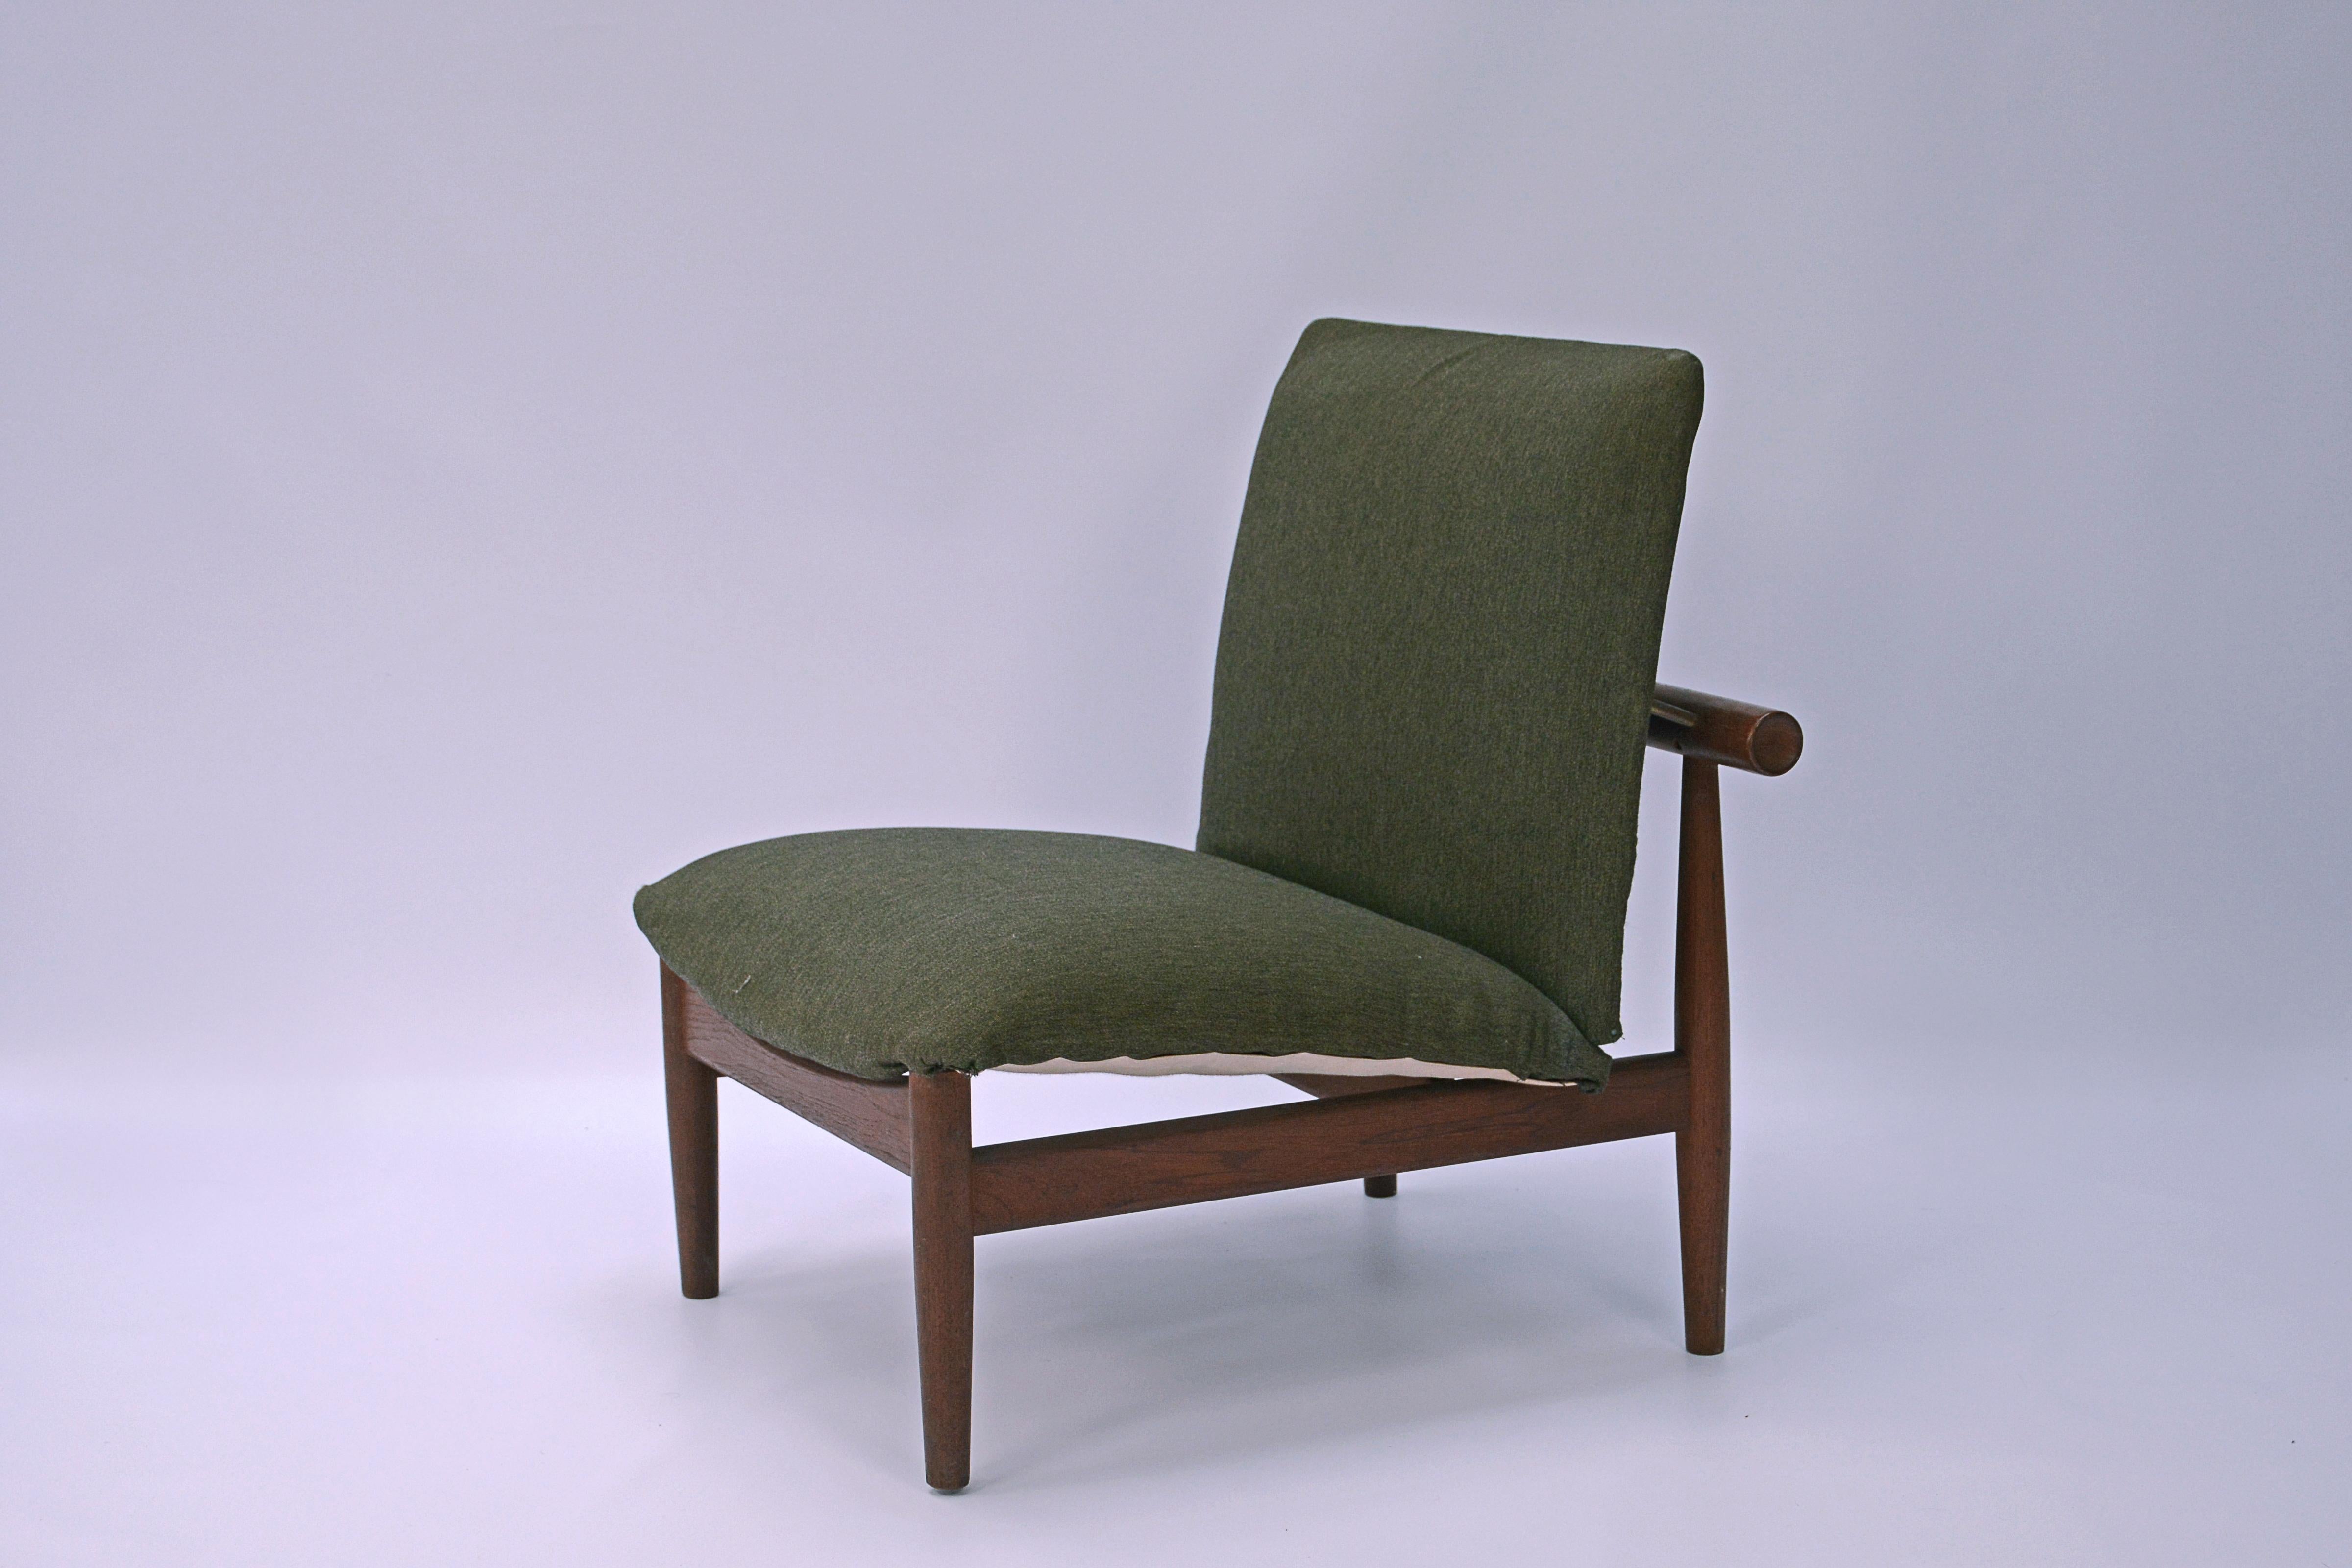 Armchair designed by Finn Juhl, made of solid teak and both are in their original upholstery. Finn Juhl's association with the furniture manufacturer France & Son resulted in a series of furniture well suited to industrial production, staying true